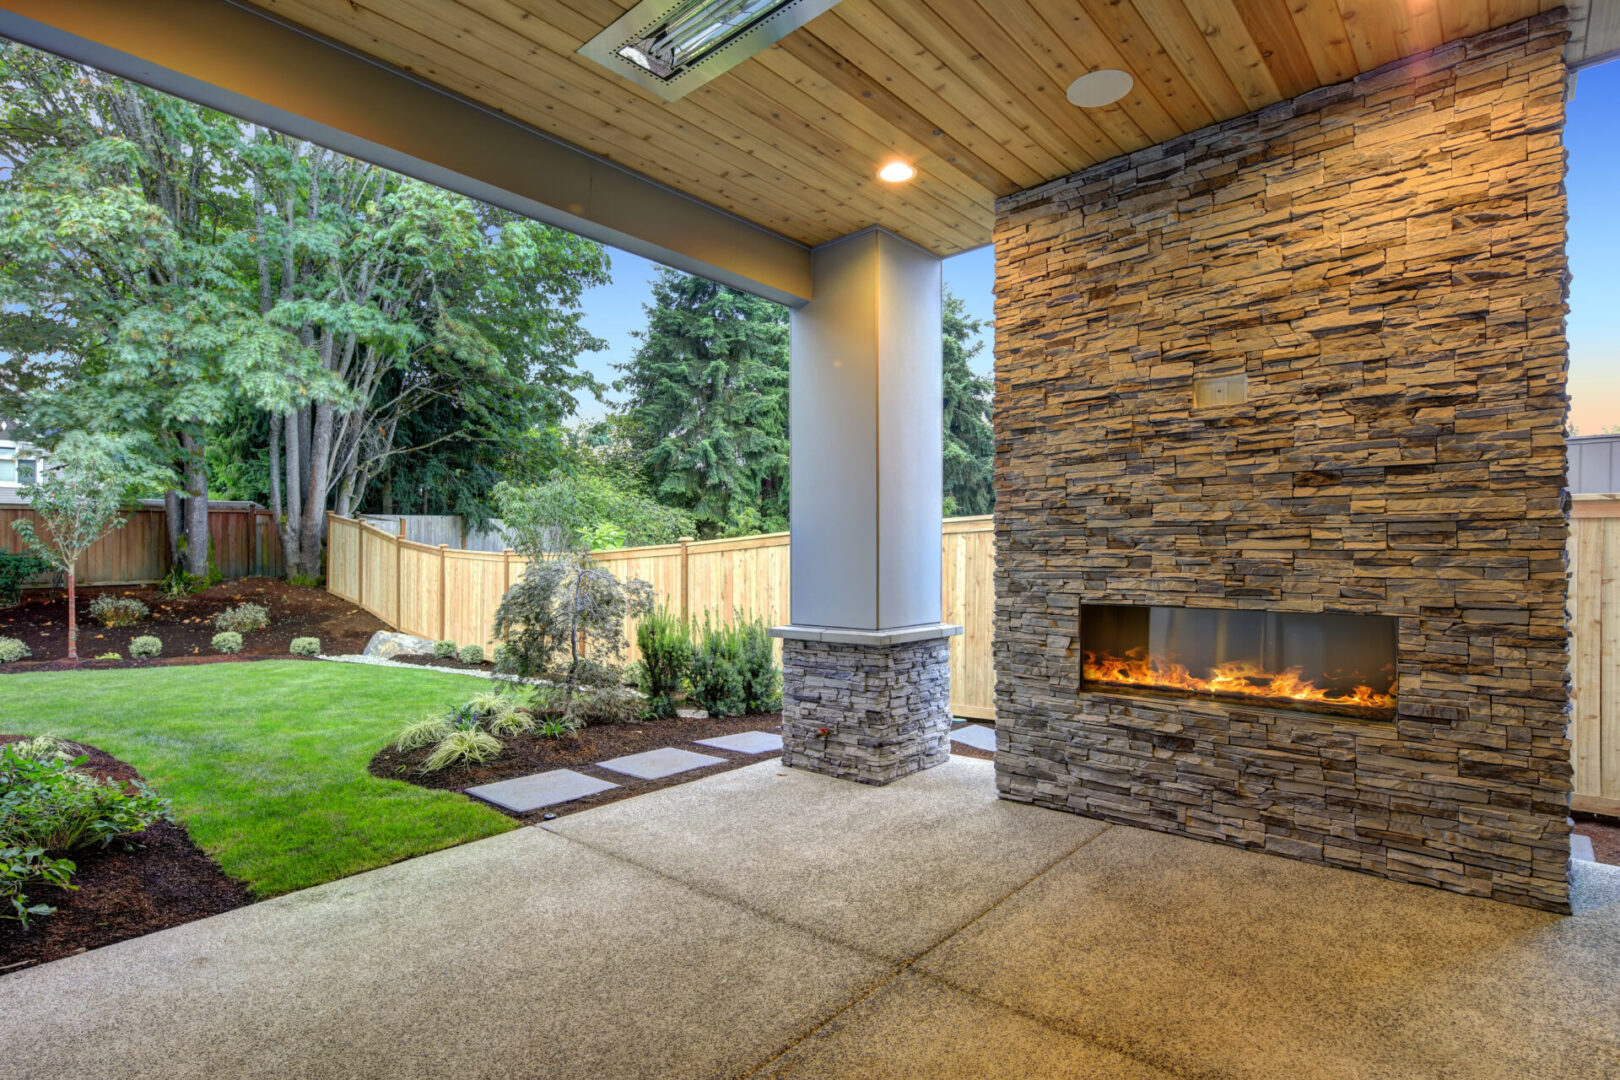 A patio with an outdoor fireplace and covered area.